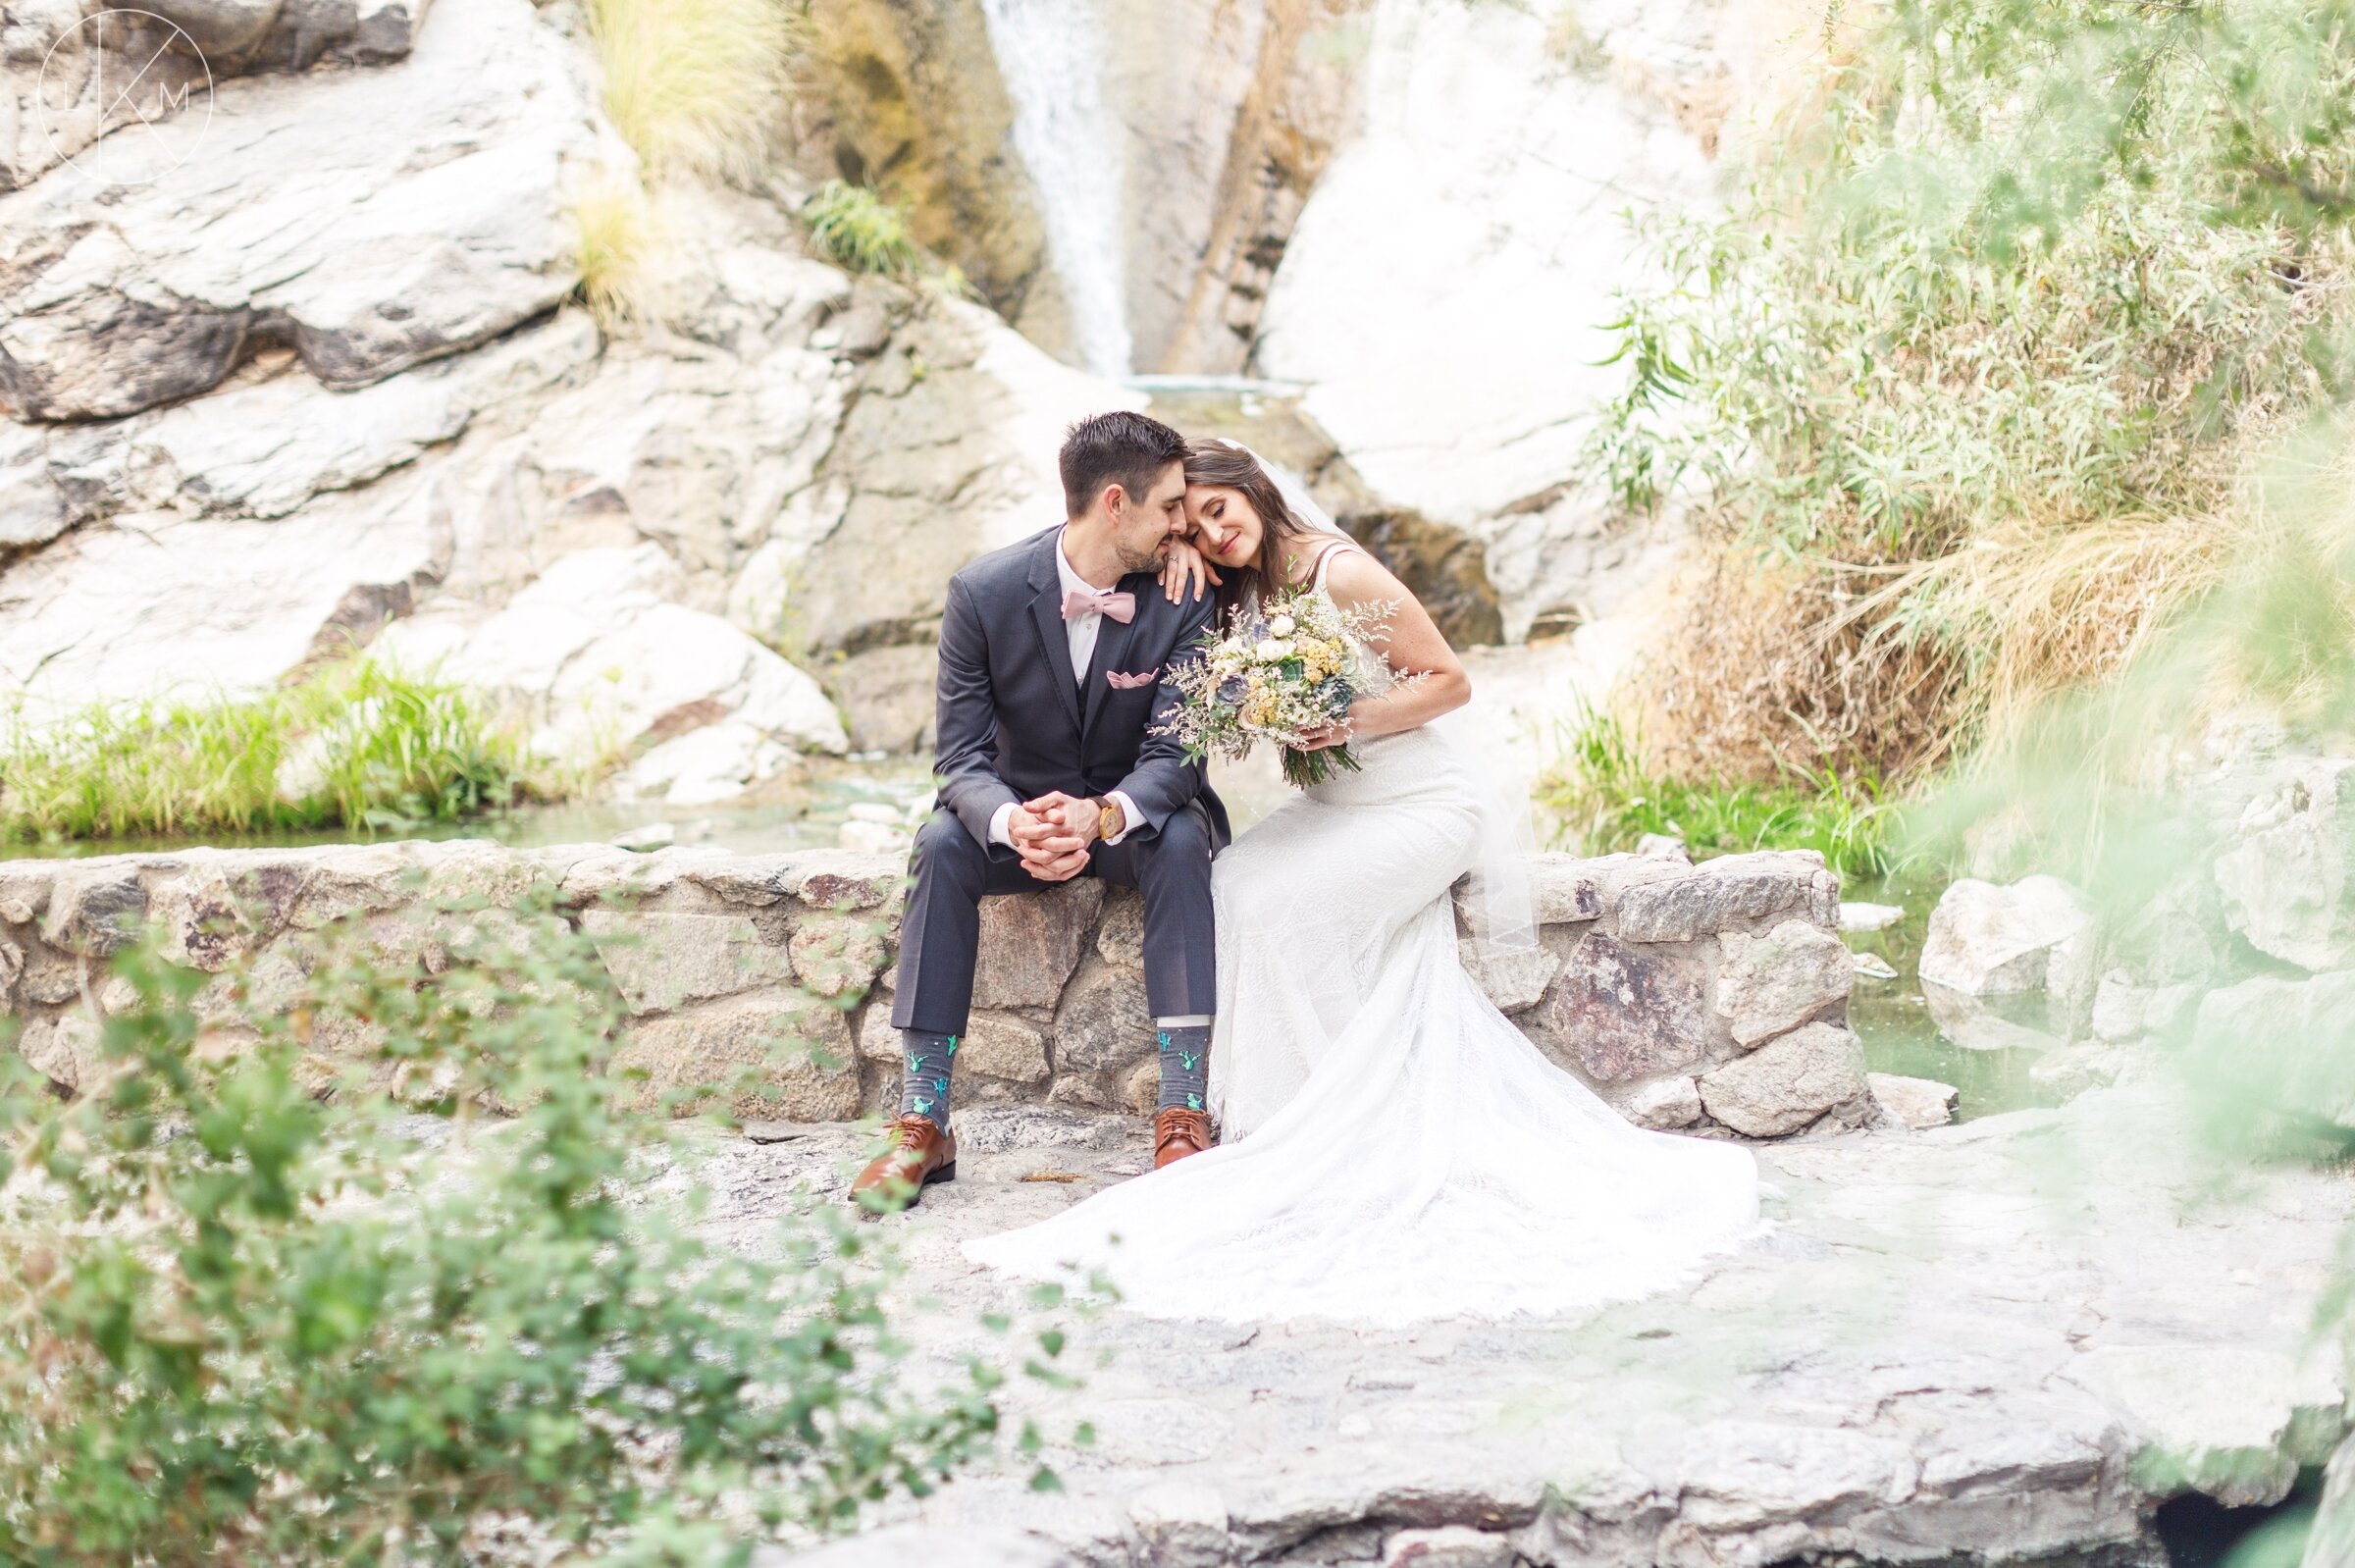 20_09_12_CLUTTER_LOWES_VENTANA_CANYON_WEDDING-PICTURES_laura-k-moore-photography 12.jpg